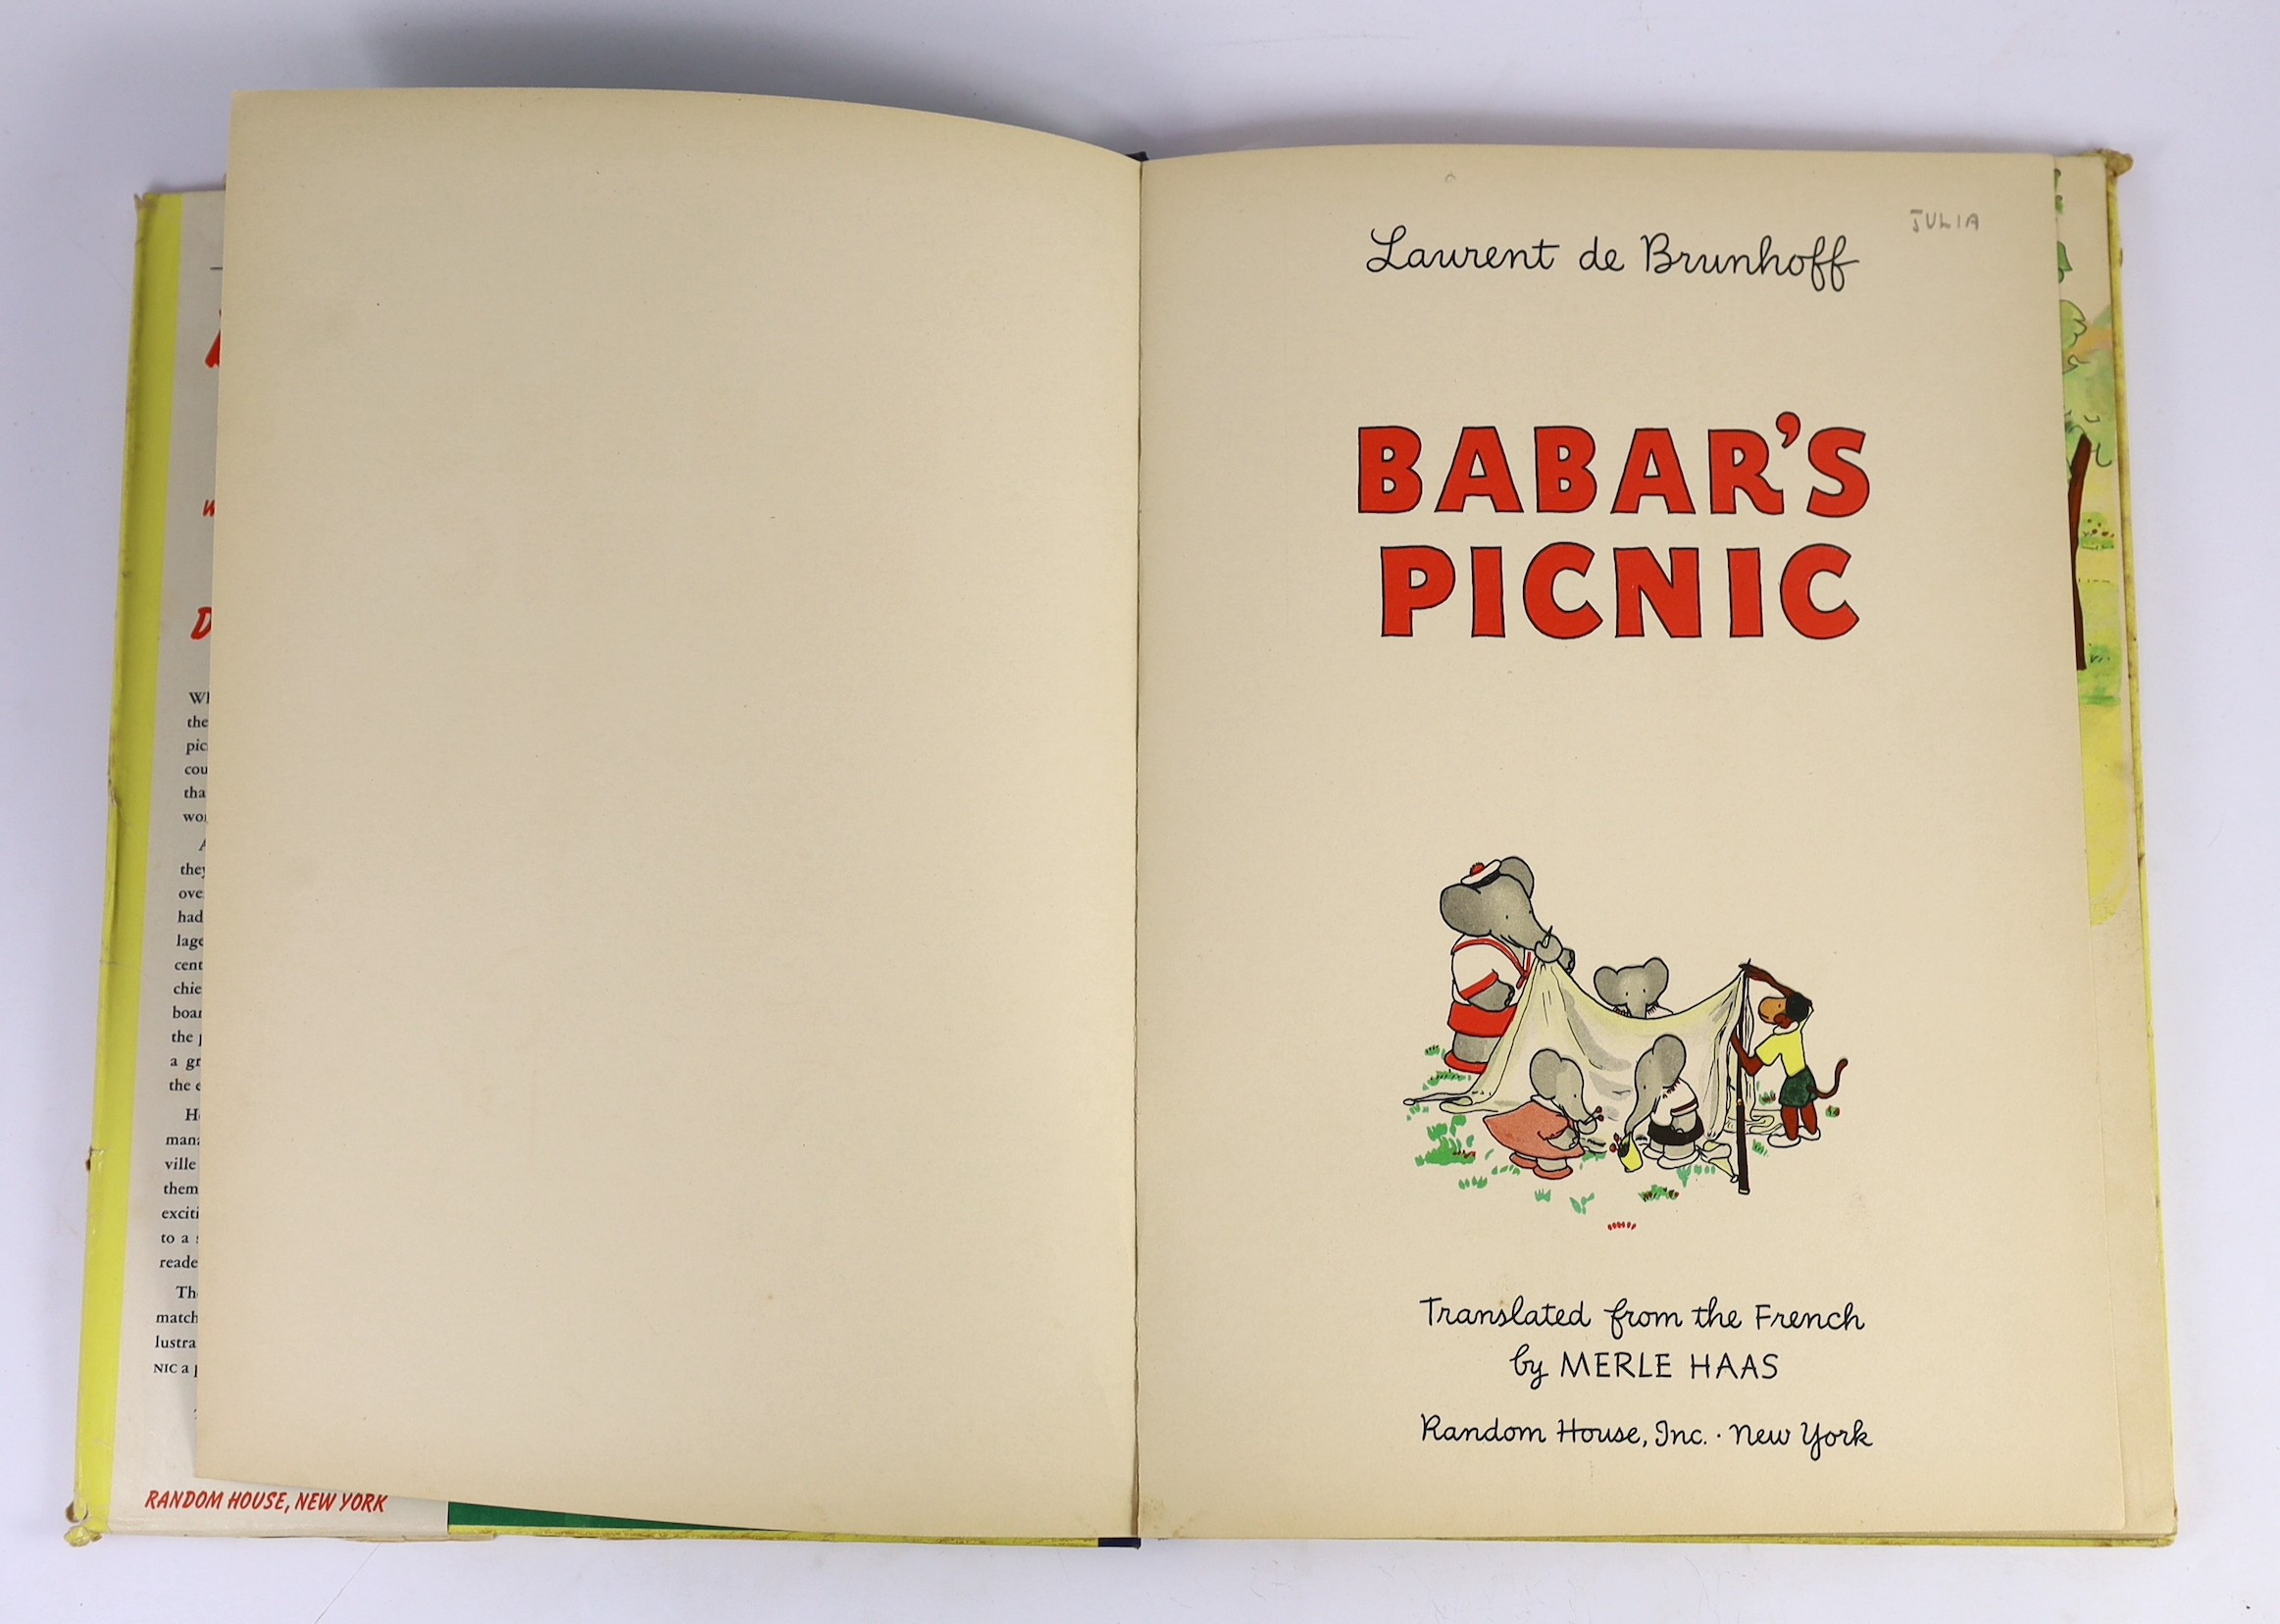 Brunhoff, Laurent de -2 works - Babar’s Picnic, folio, pictorial boards with d/j, translated by Merle Haas, Random House, New York, 1947 and Babar’s Visit to Bird Island, folio, pictorial boards, Methuen & Co., Ltd, Lond